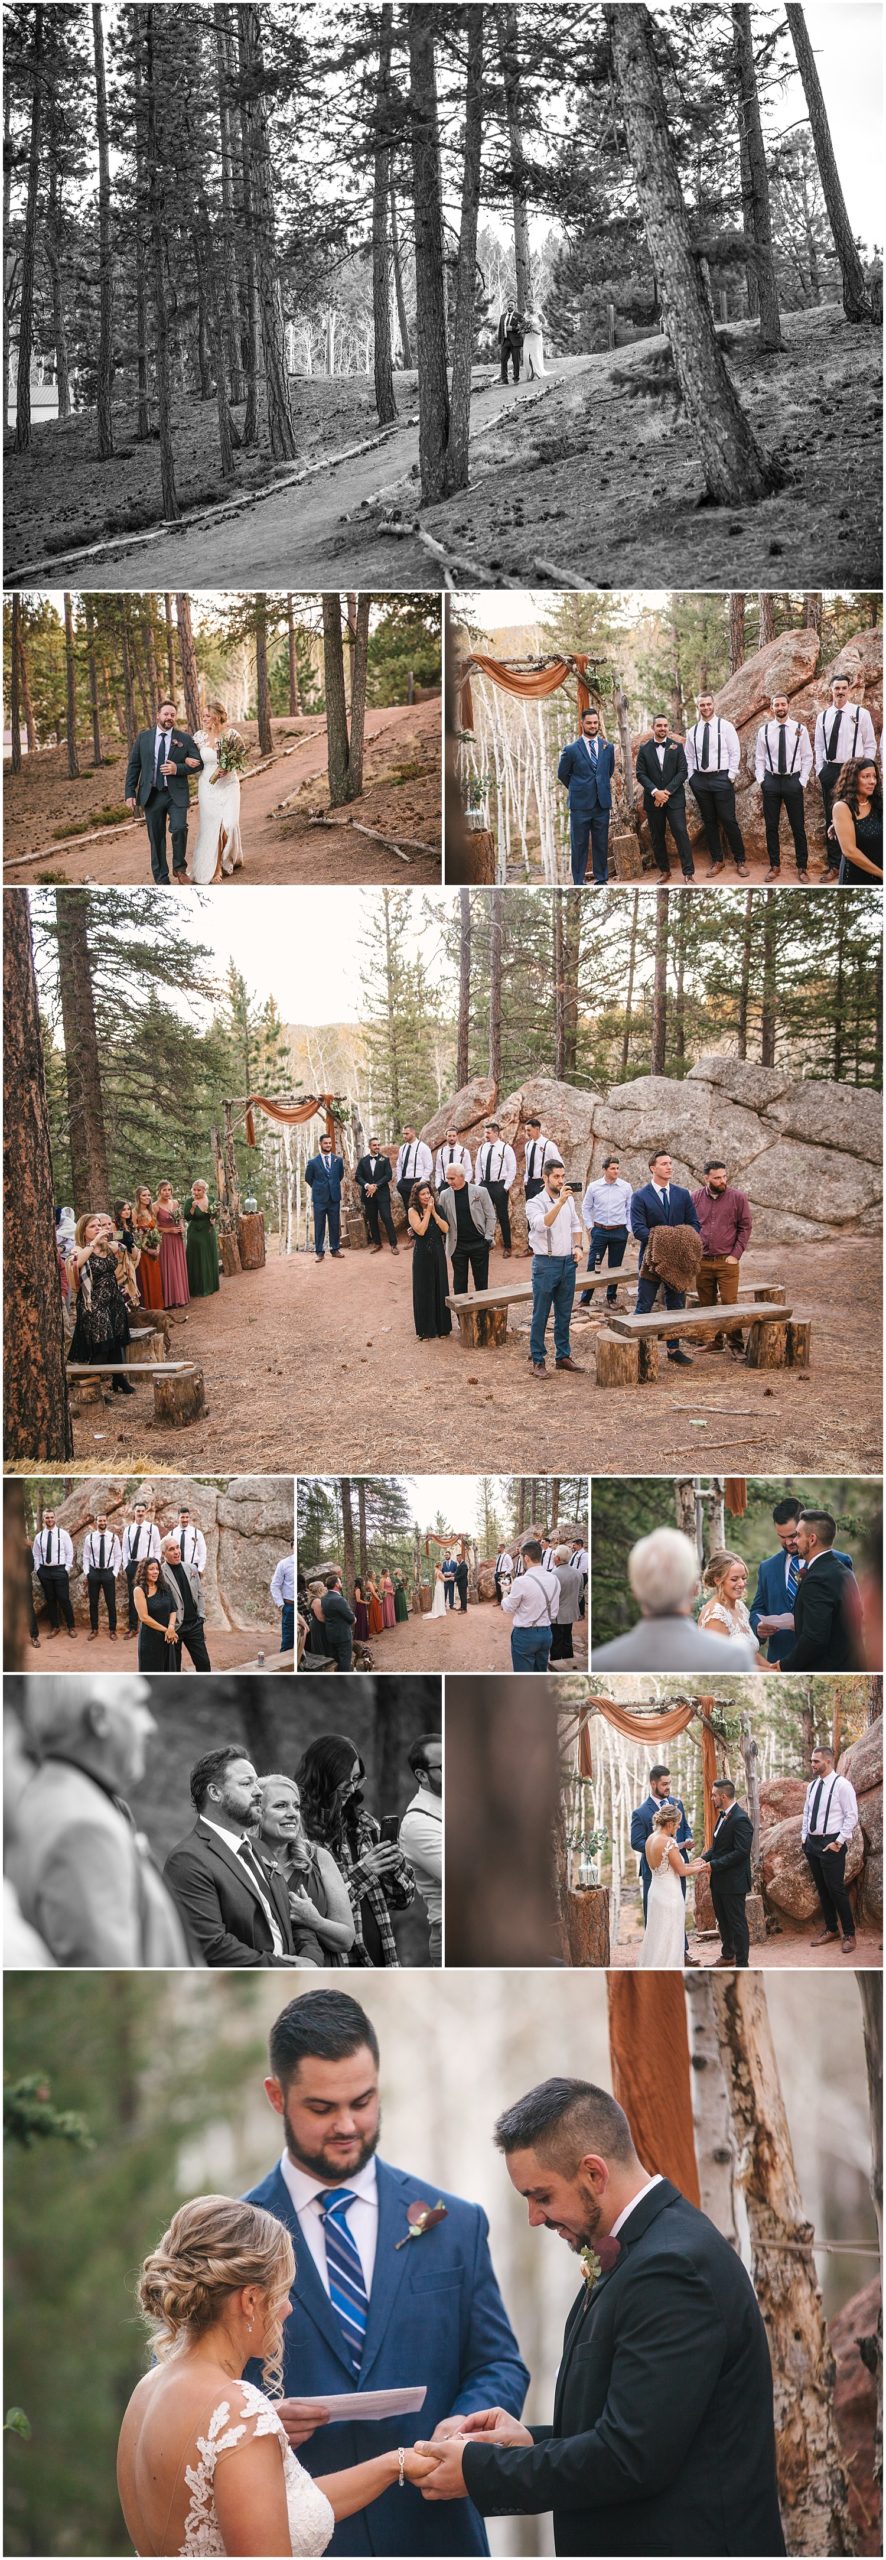 Woodland Park intimate wedding ceremony in aspen forest